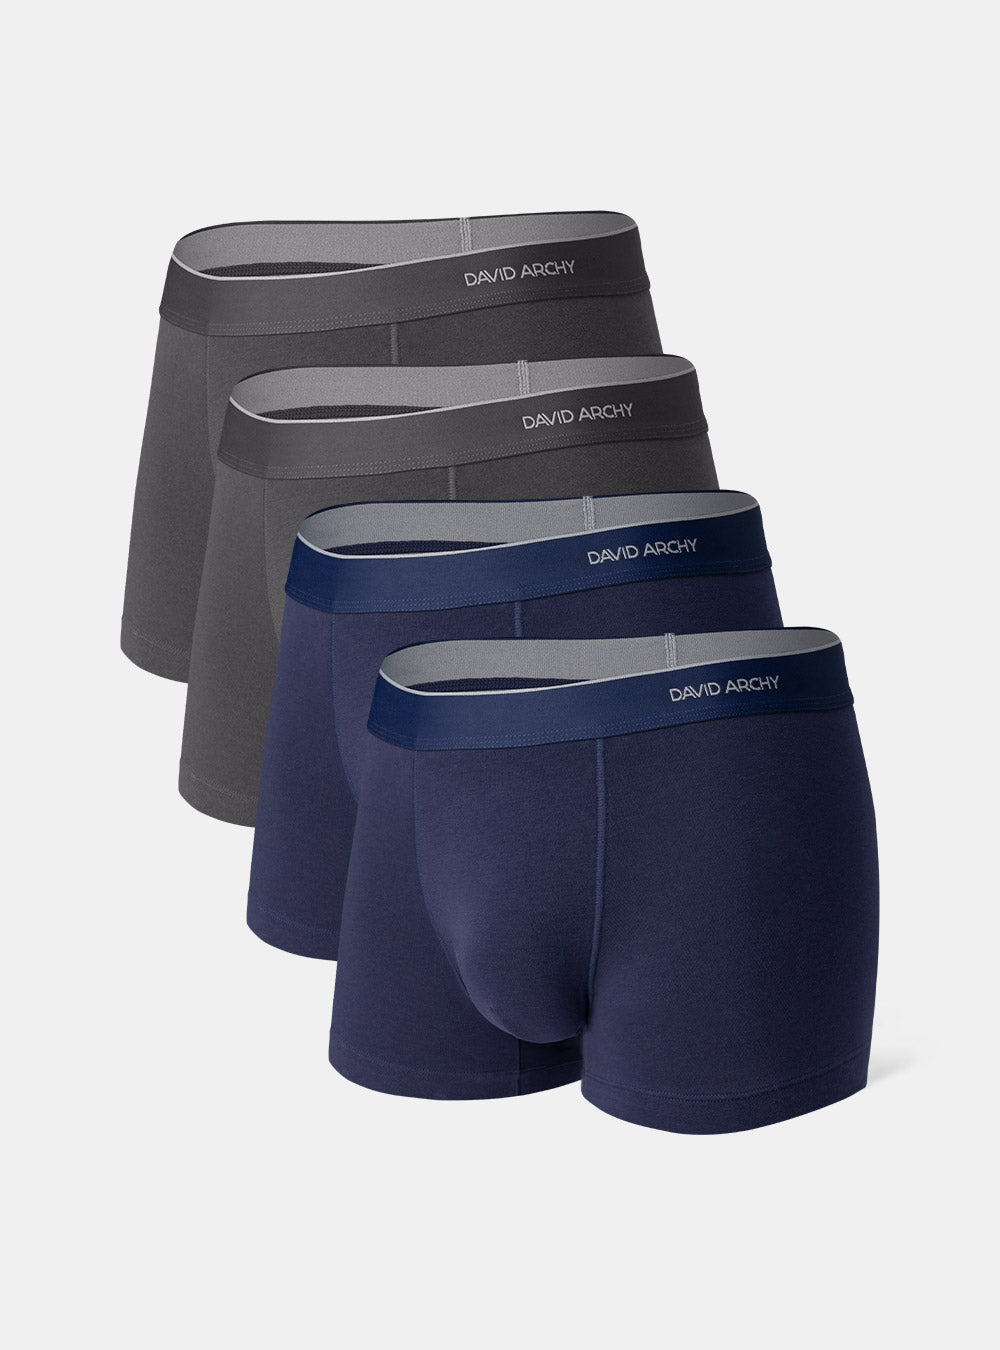 4 Packs Cotton Trunks with Pouch David Archy Soft Breathable Elastic ...